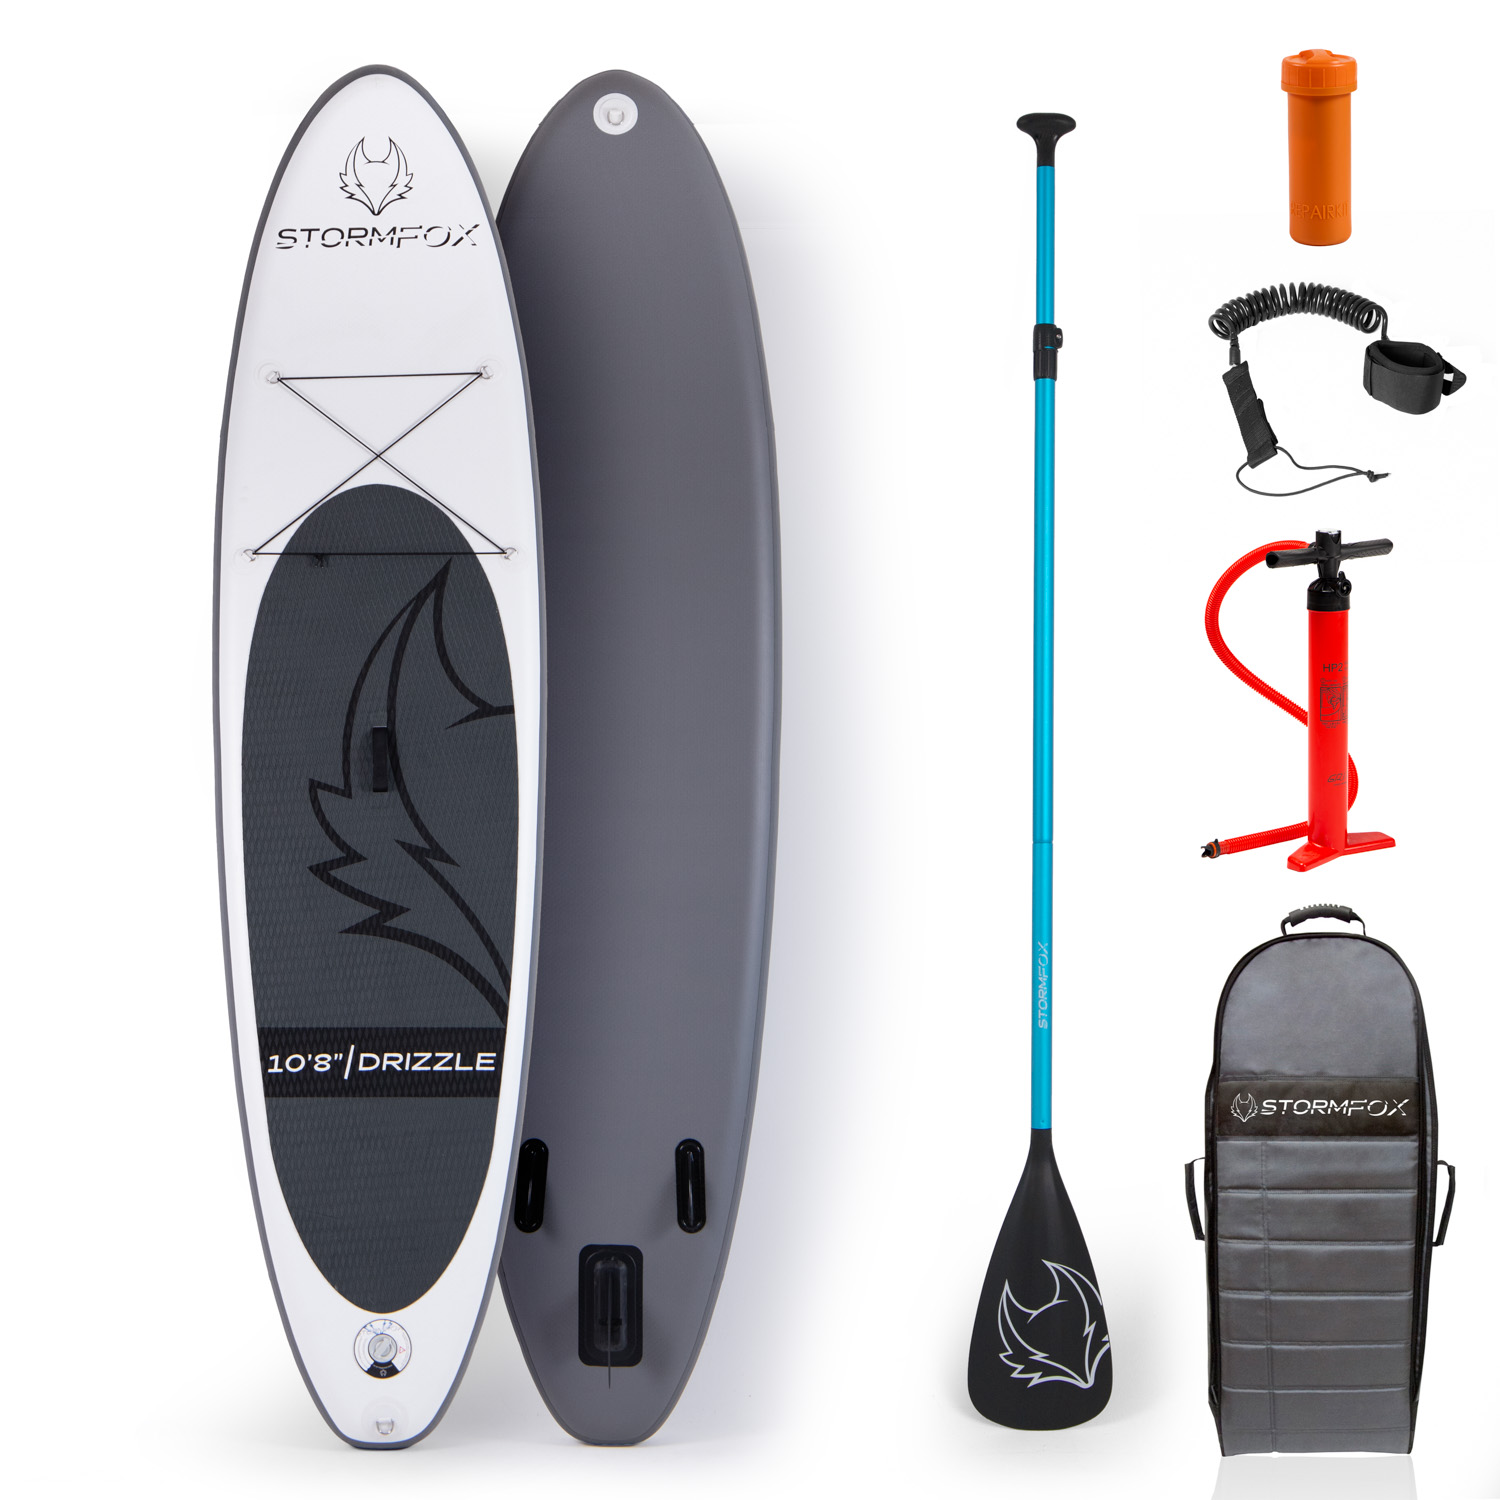 Drizzle Stand Up Paddle Board Kit - 10'8